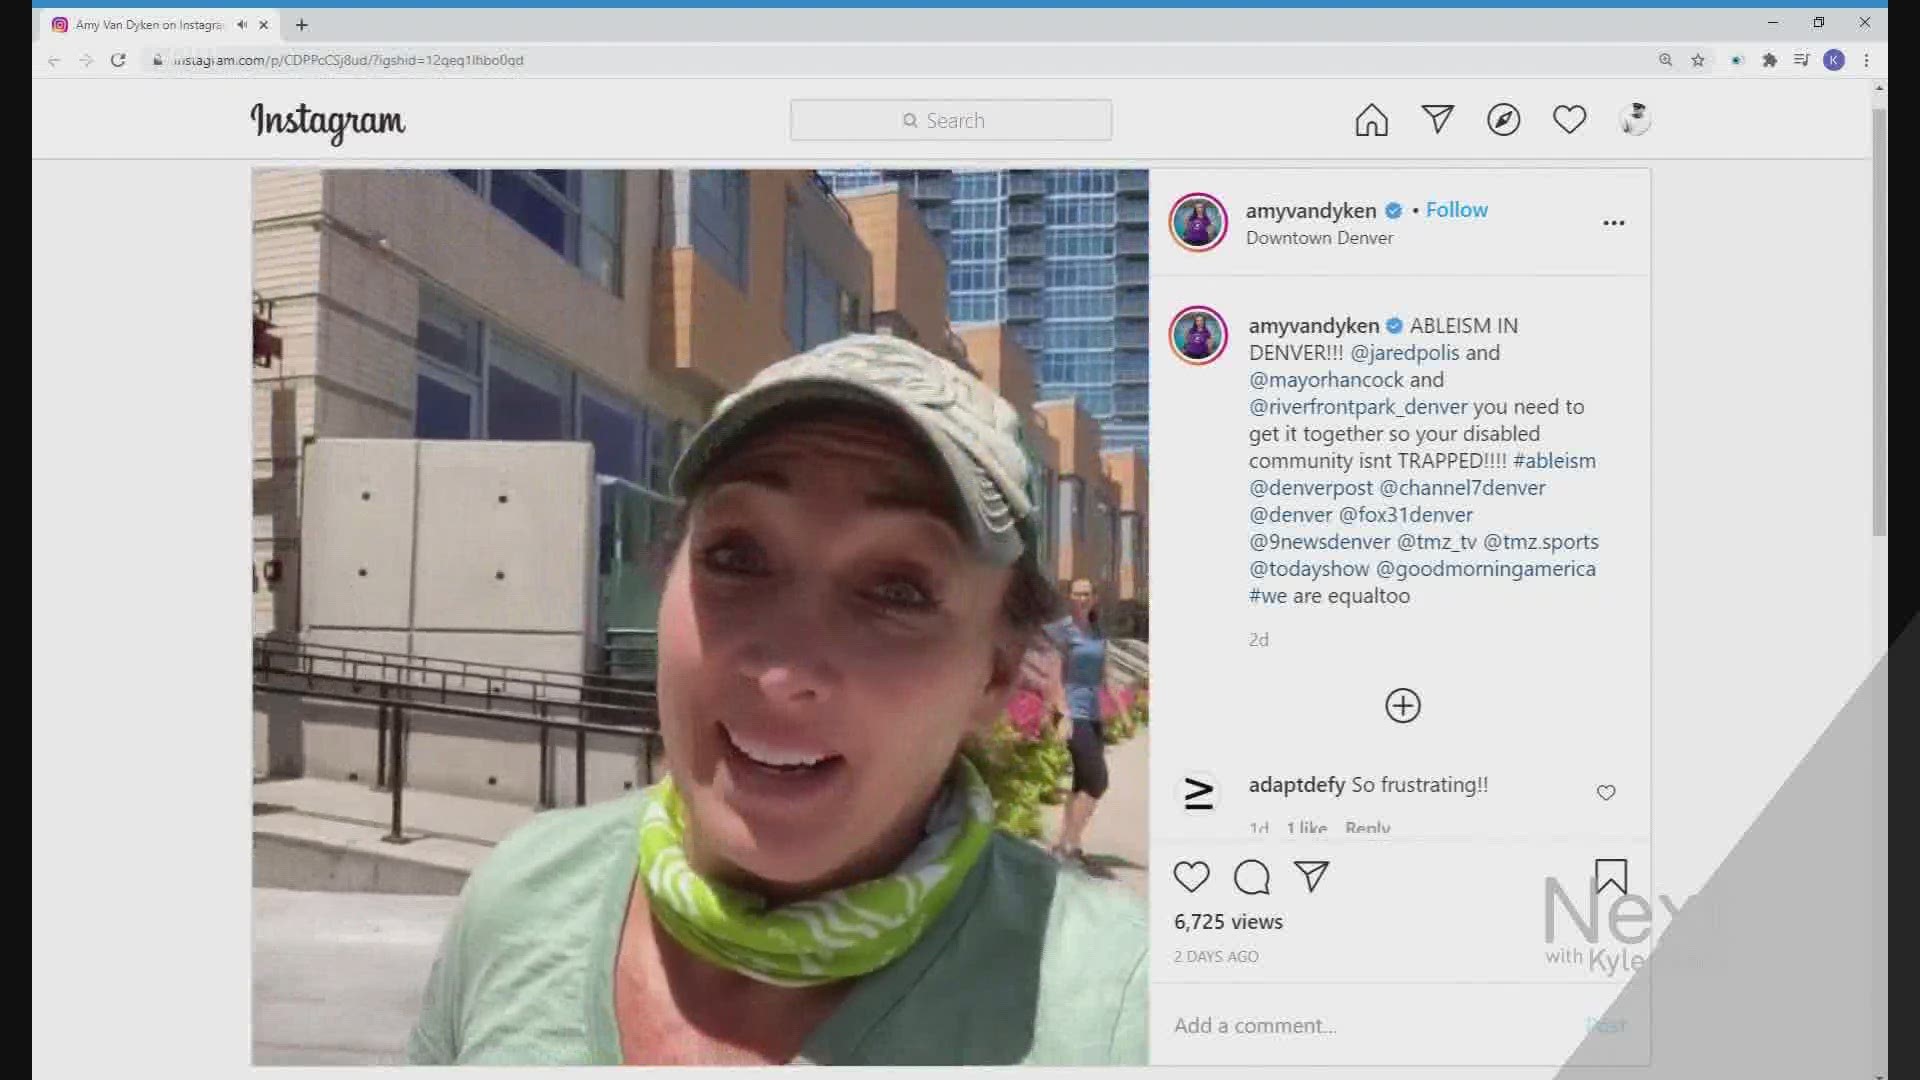 Van Dyken is a former Olympian who severed her spinal cord in 2014. She posted on Instagram that she couldn't access Union Station because of broken elevators.